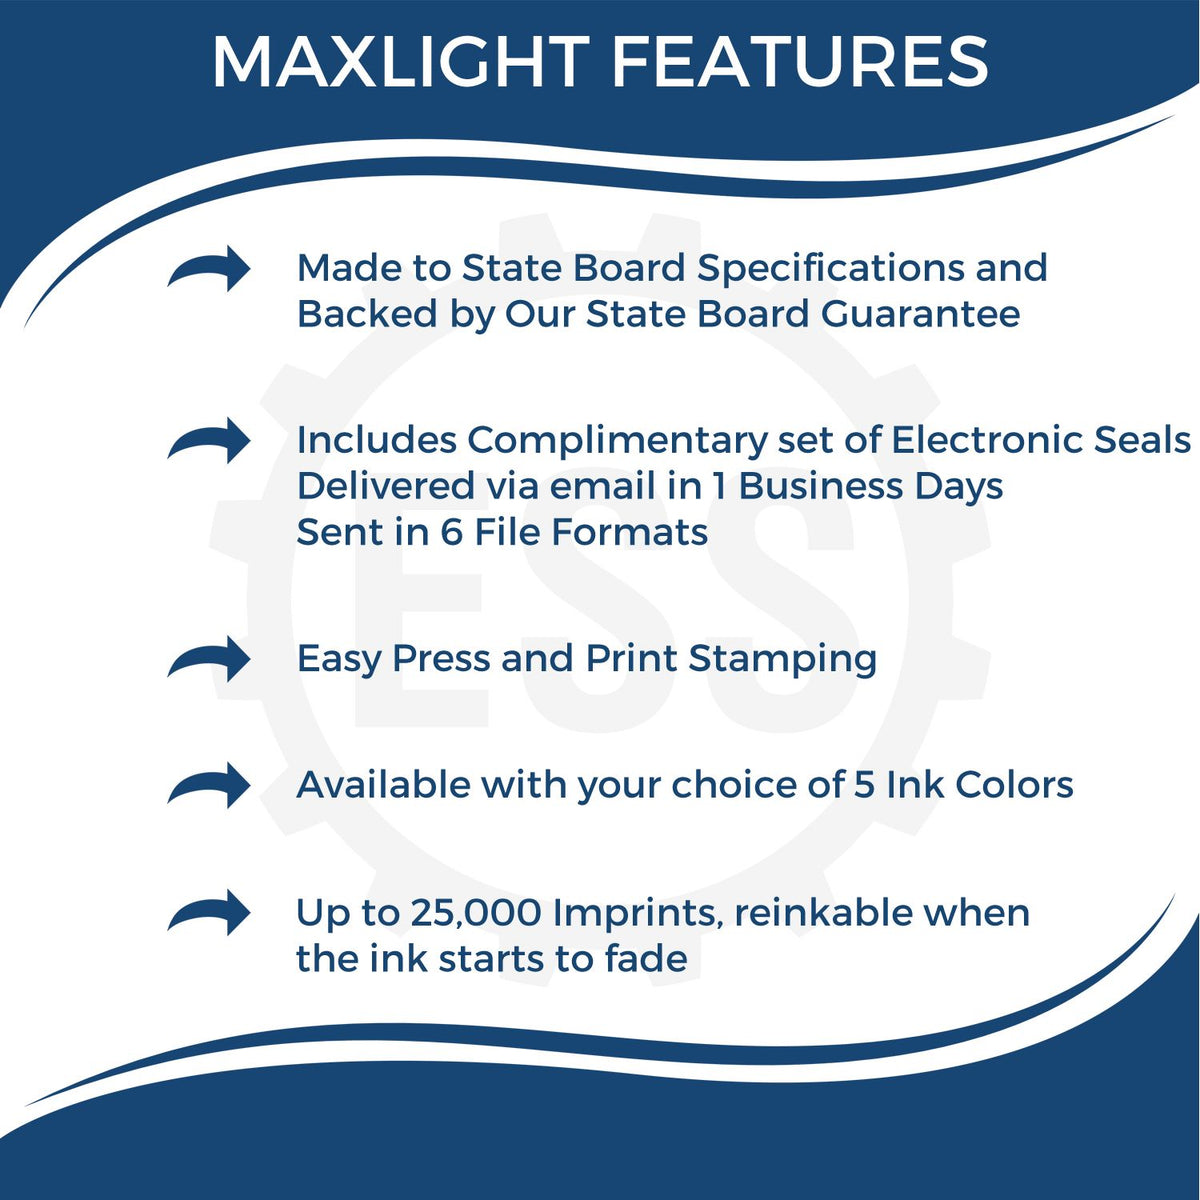 A picture of an infographic highlighting the selling points for the Premium MaxLight Pre-Inked North Carolina Landscape Architectural Stamp